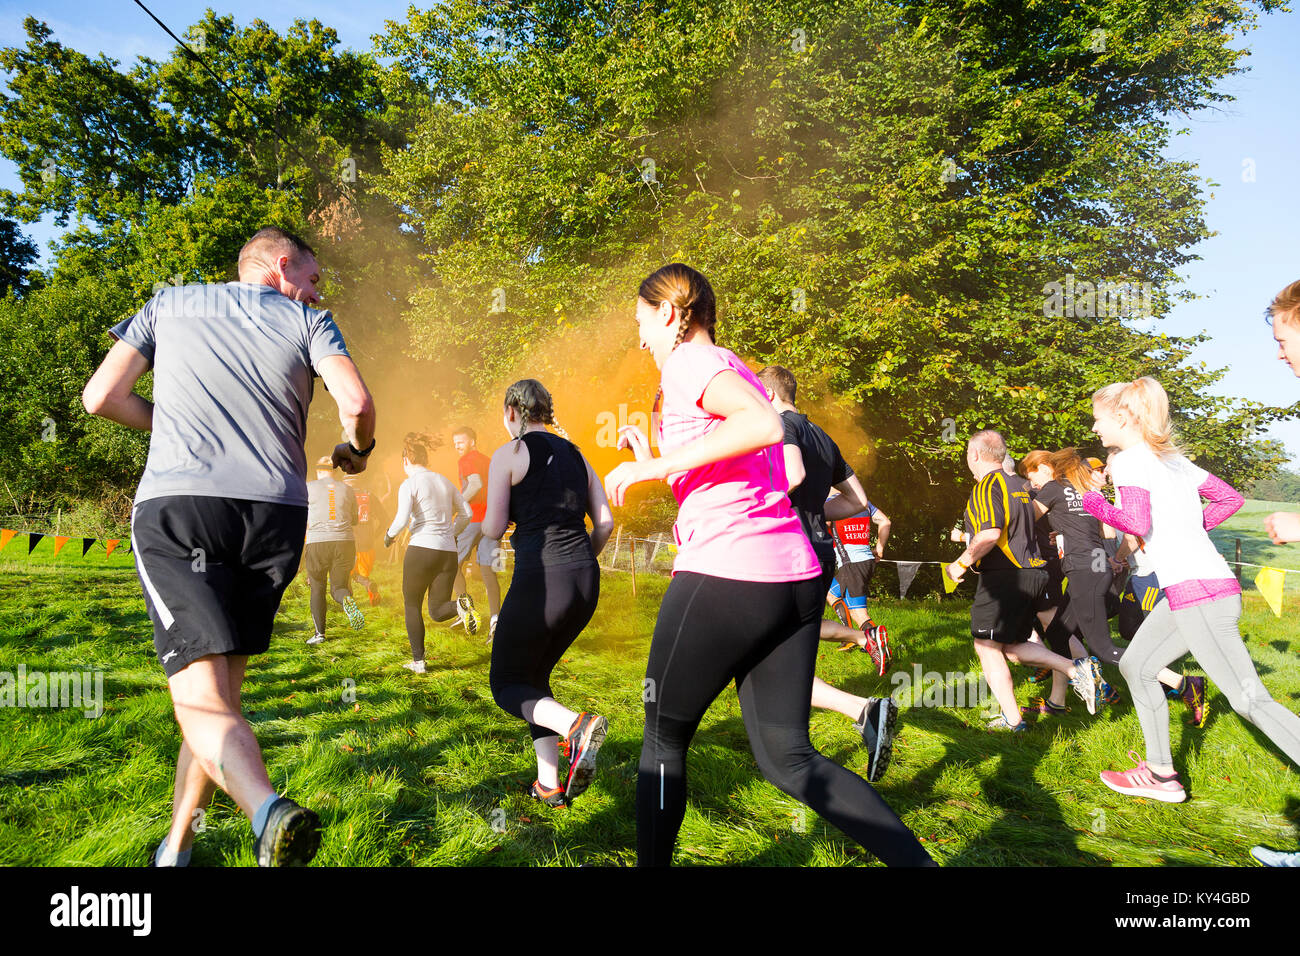 Sussex, UK. A group of competitors begin the Tough Mudder event. Stock Photo